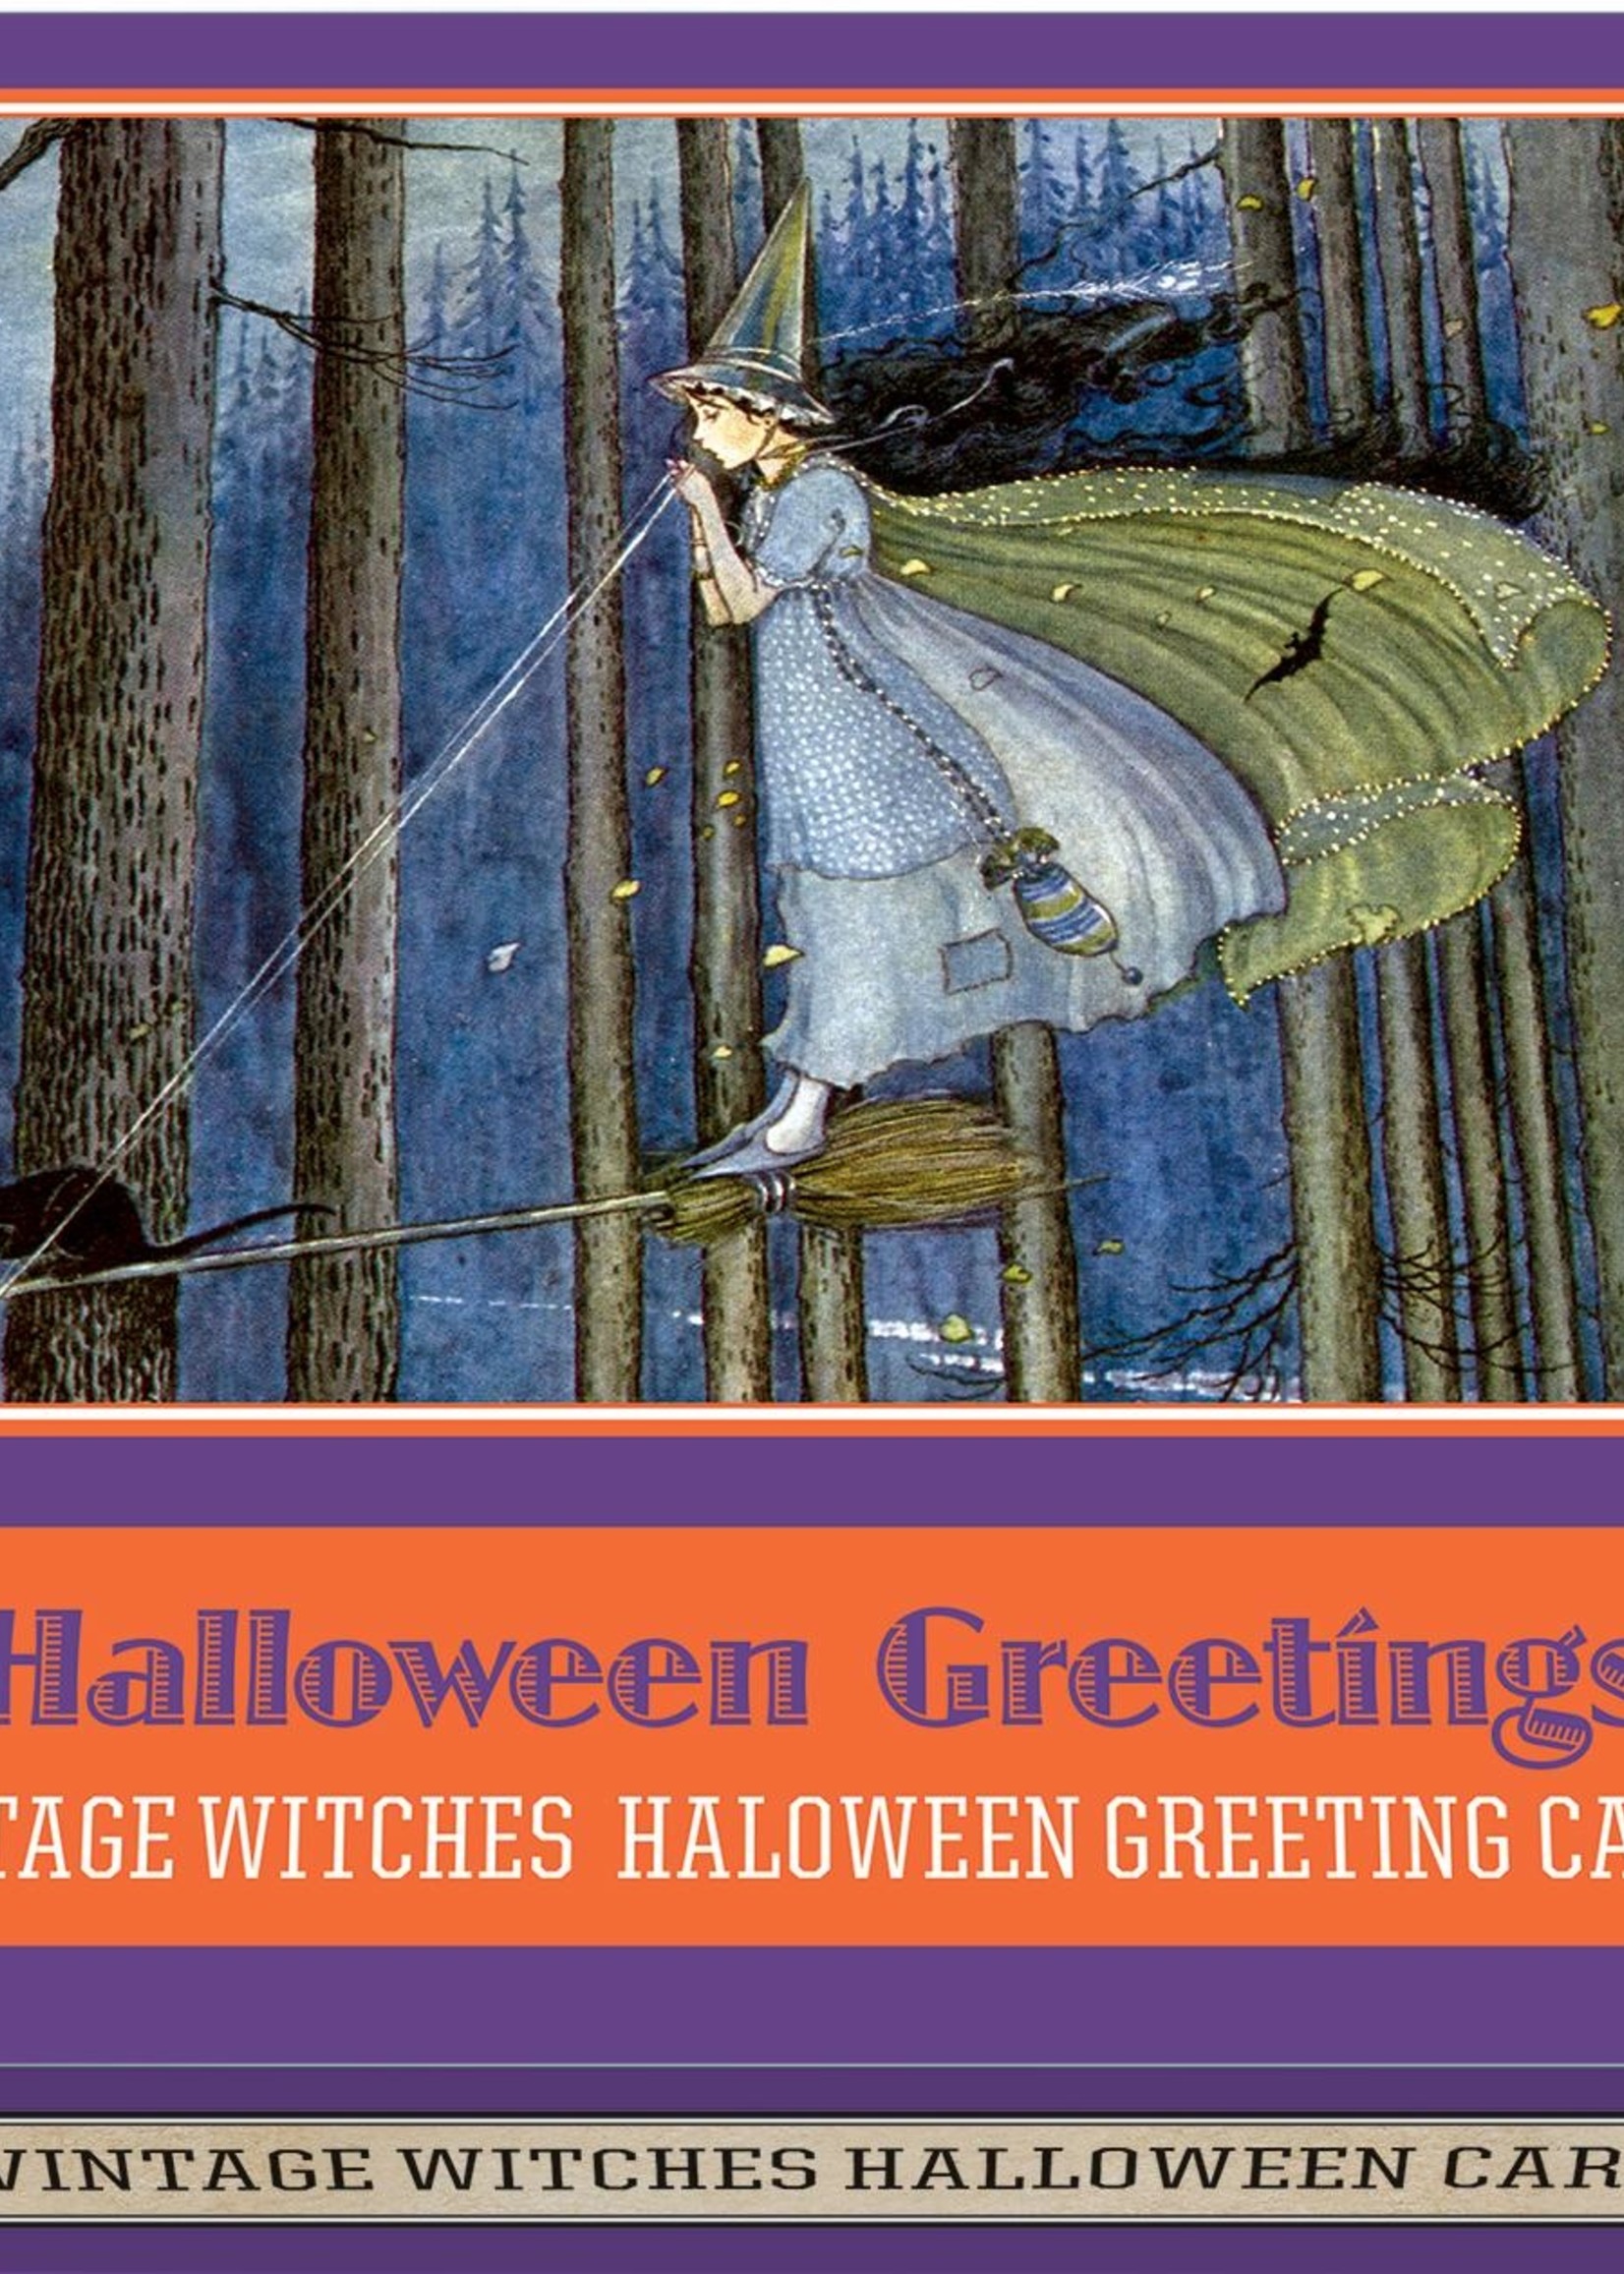 Halloween Greetings Vintage Witches Greeting Cards, Set/12 - Box